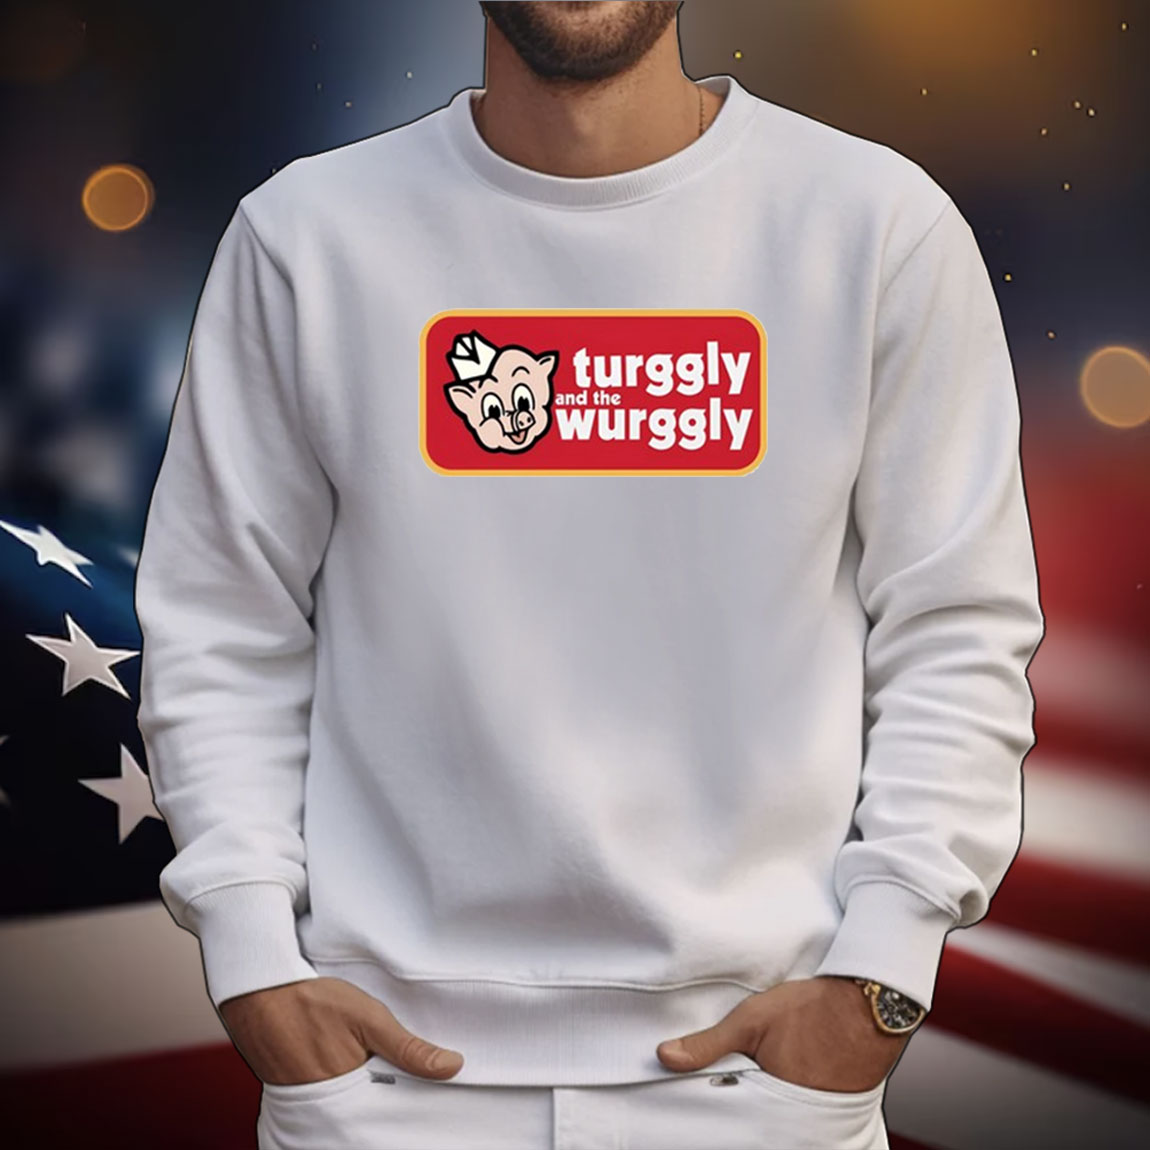 Turggly And The Wurggly T-Shirts